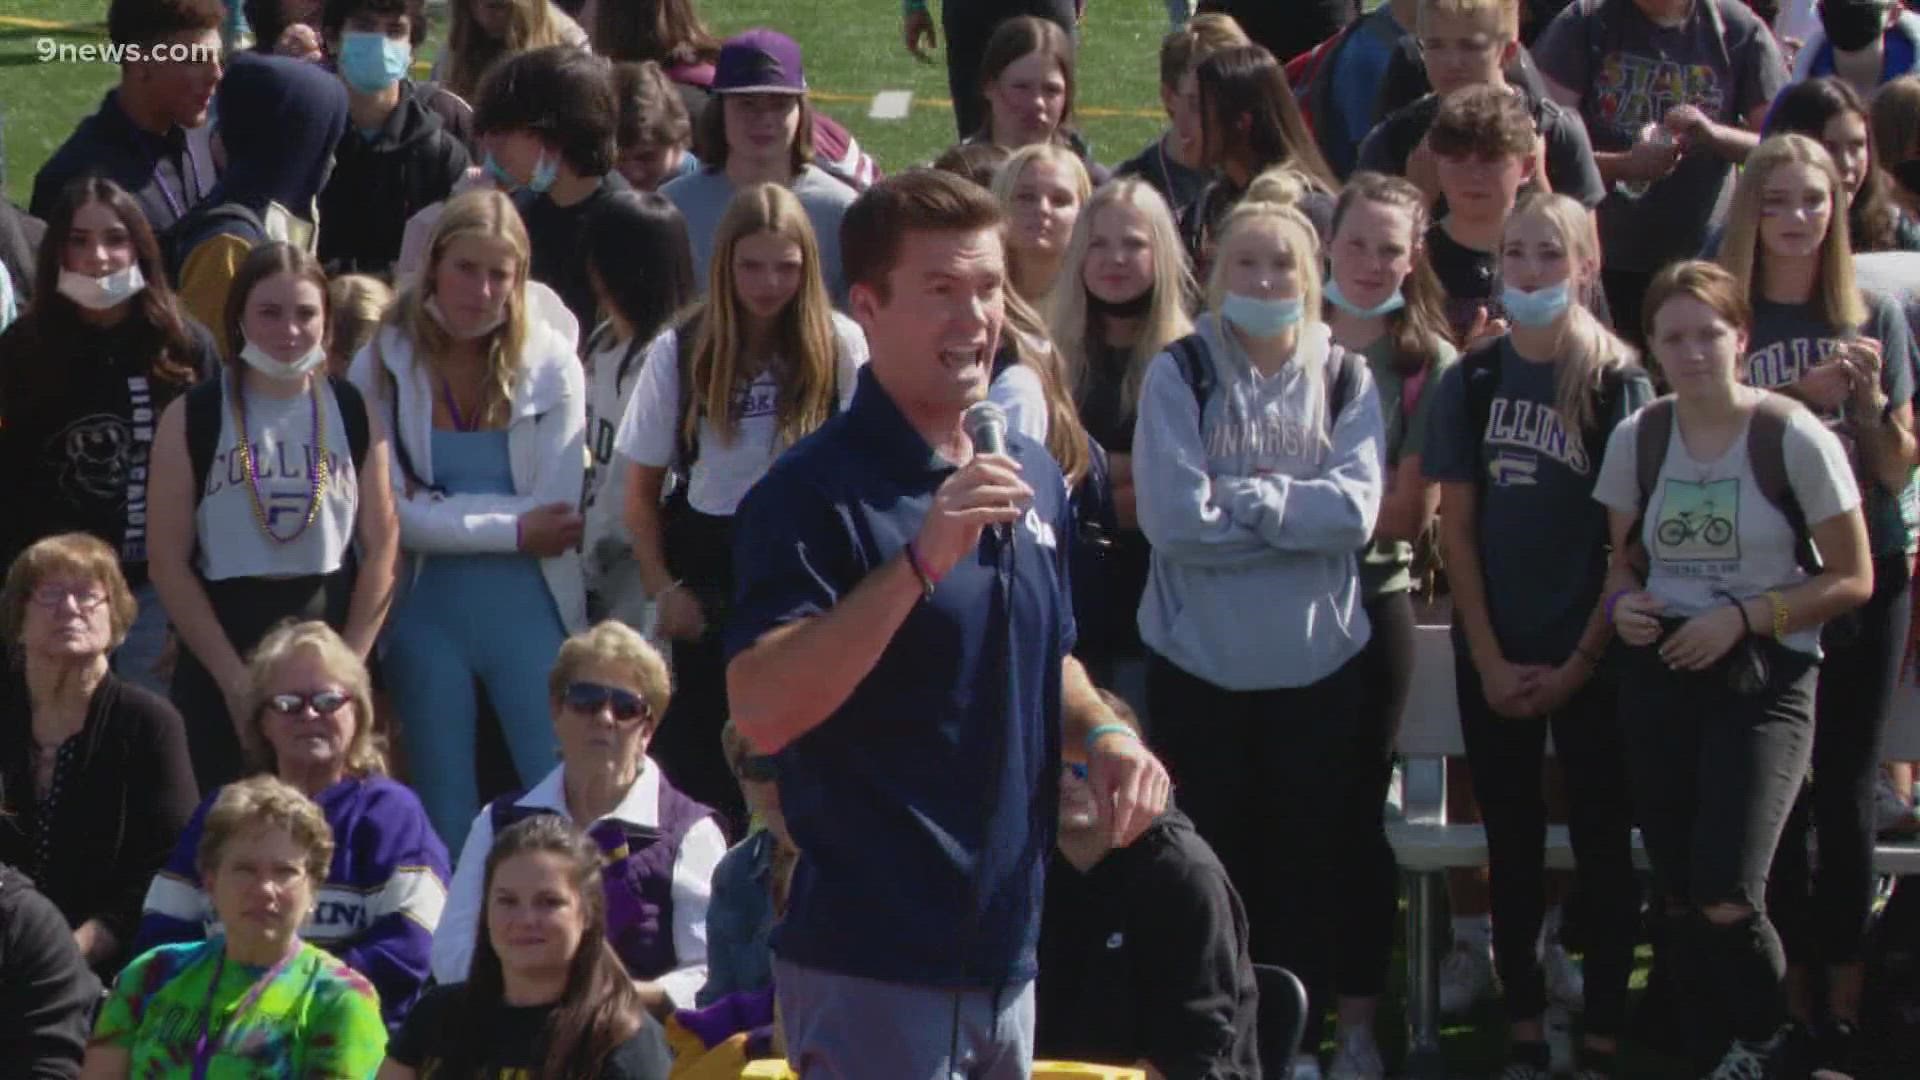 The Lambkins and Lobos will play on Friday night at French Field and 9NEWS' Scotty Gange was there as Fort Collins got excited for the game.